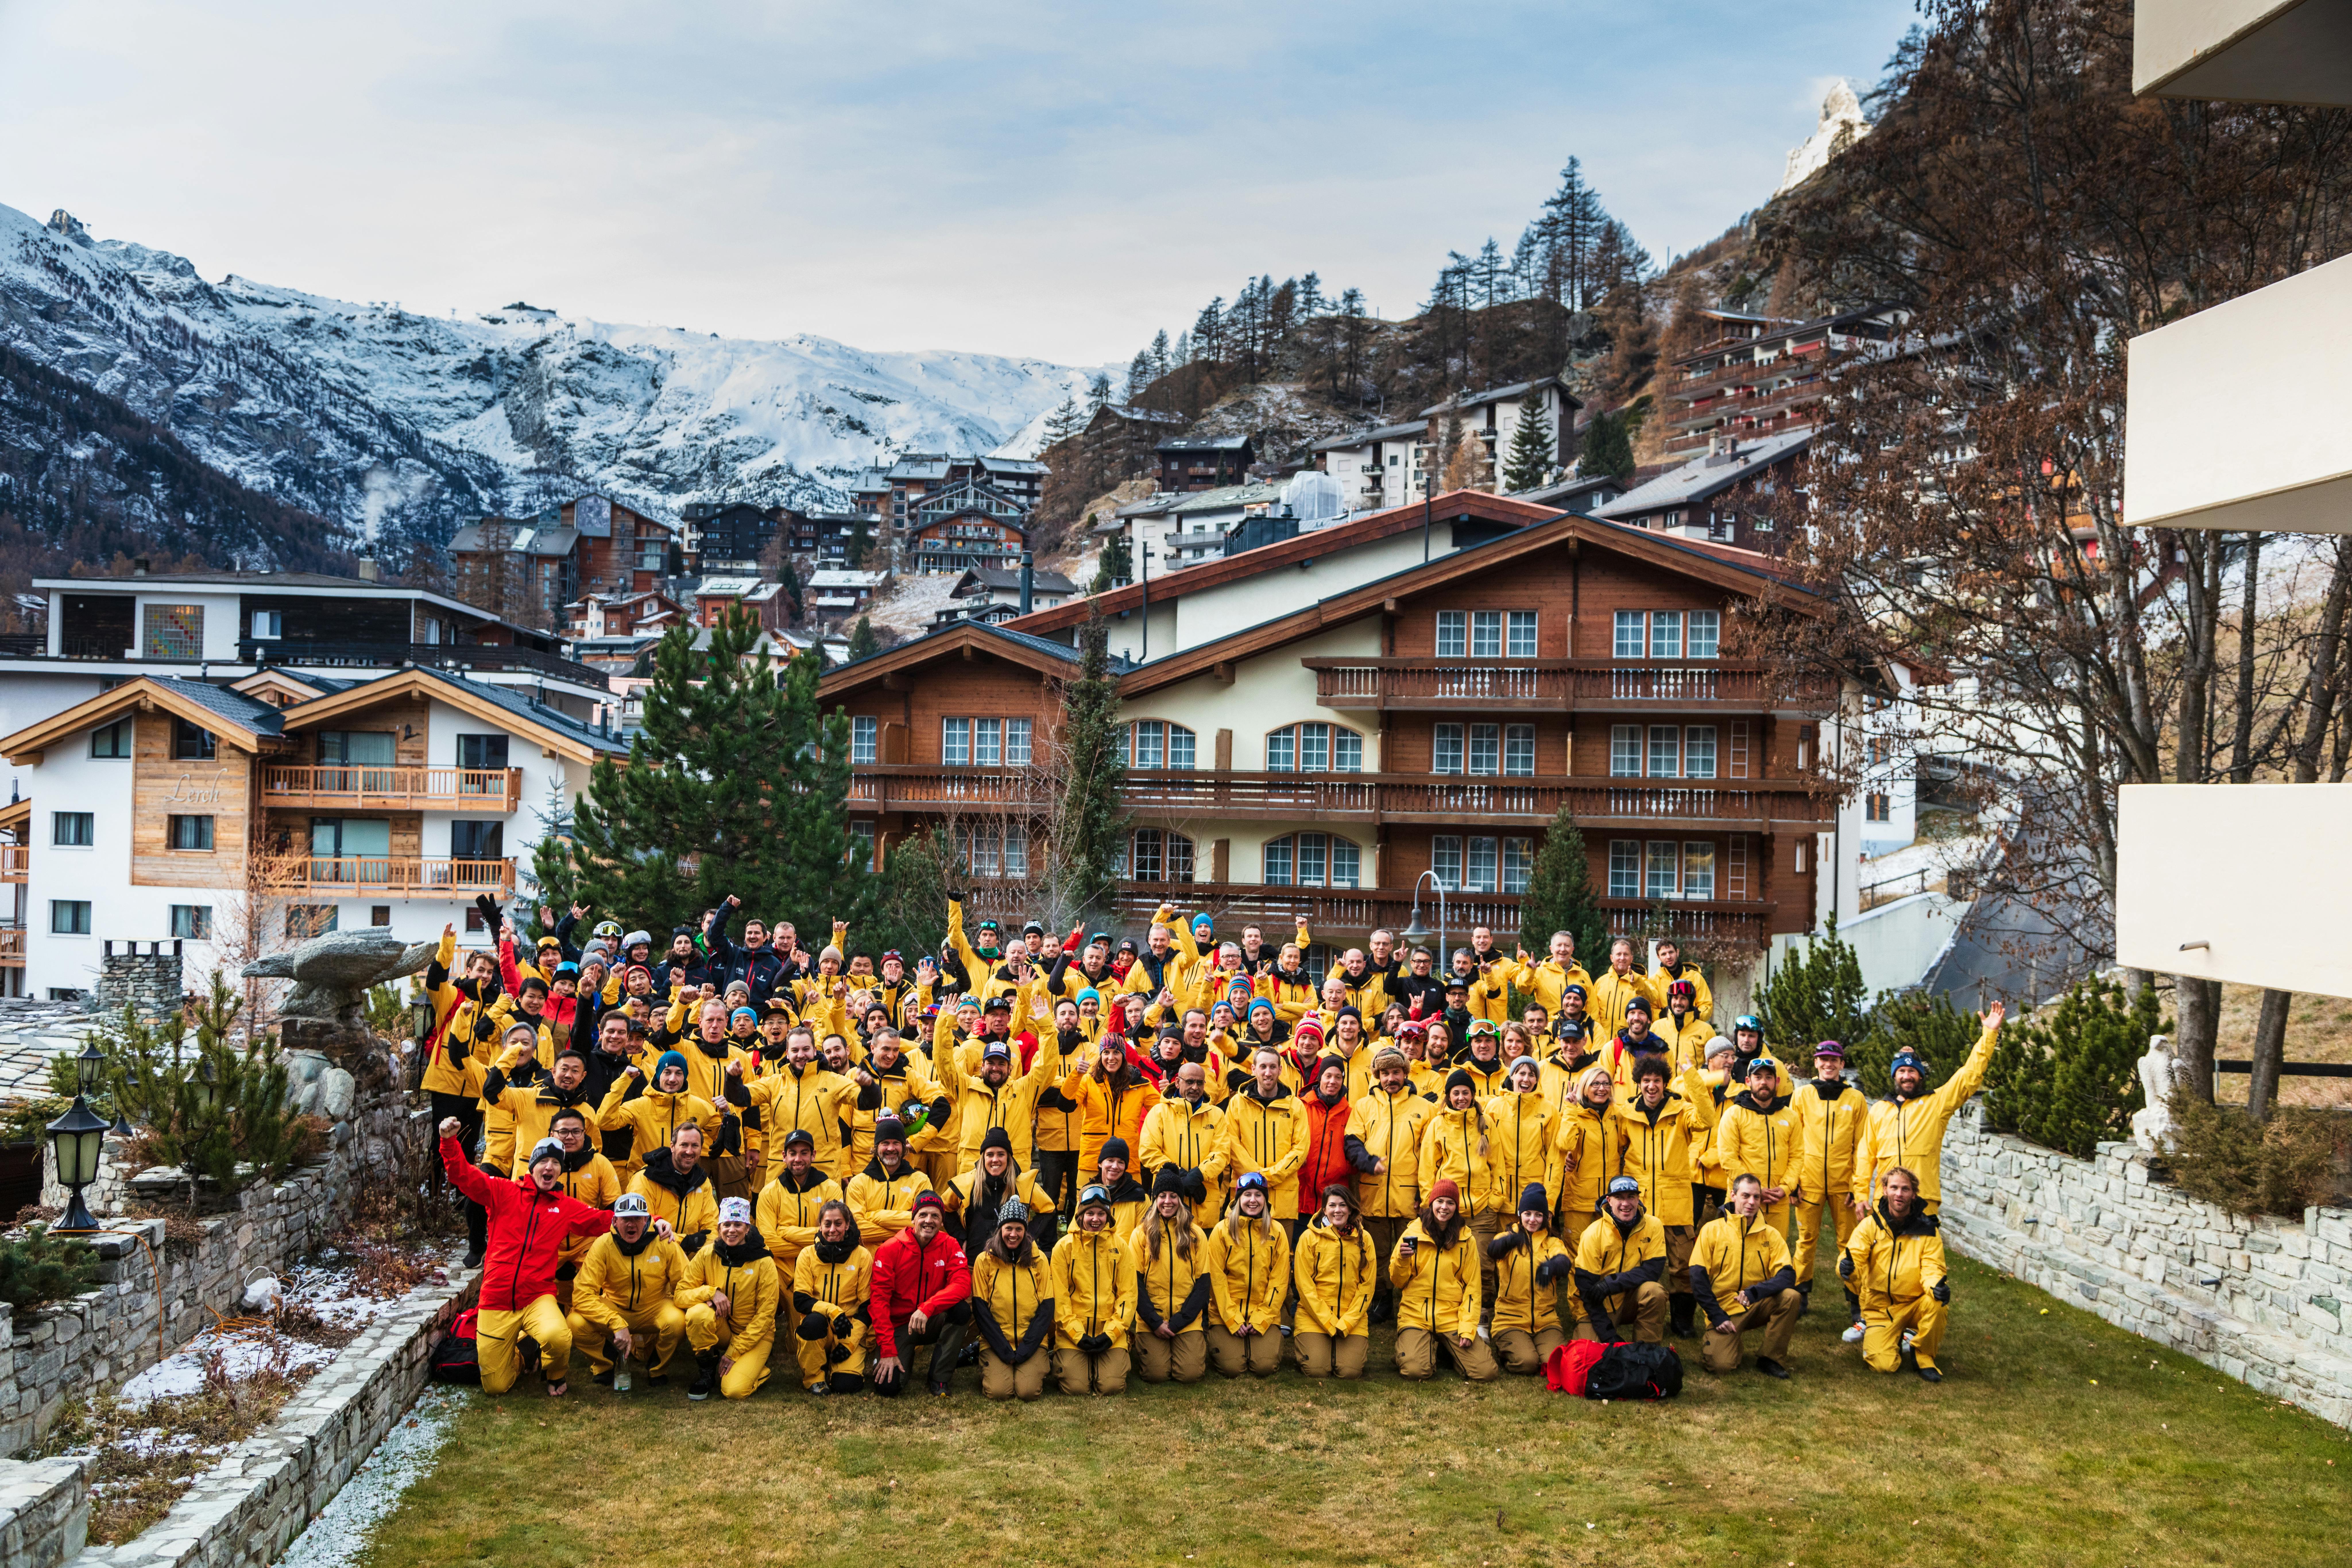 The North Face staff in a group photo in a mountain town before the pandemic.